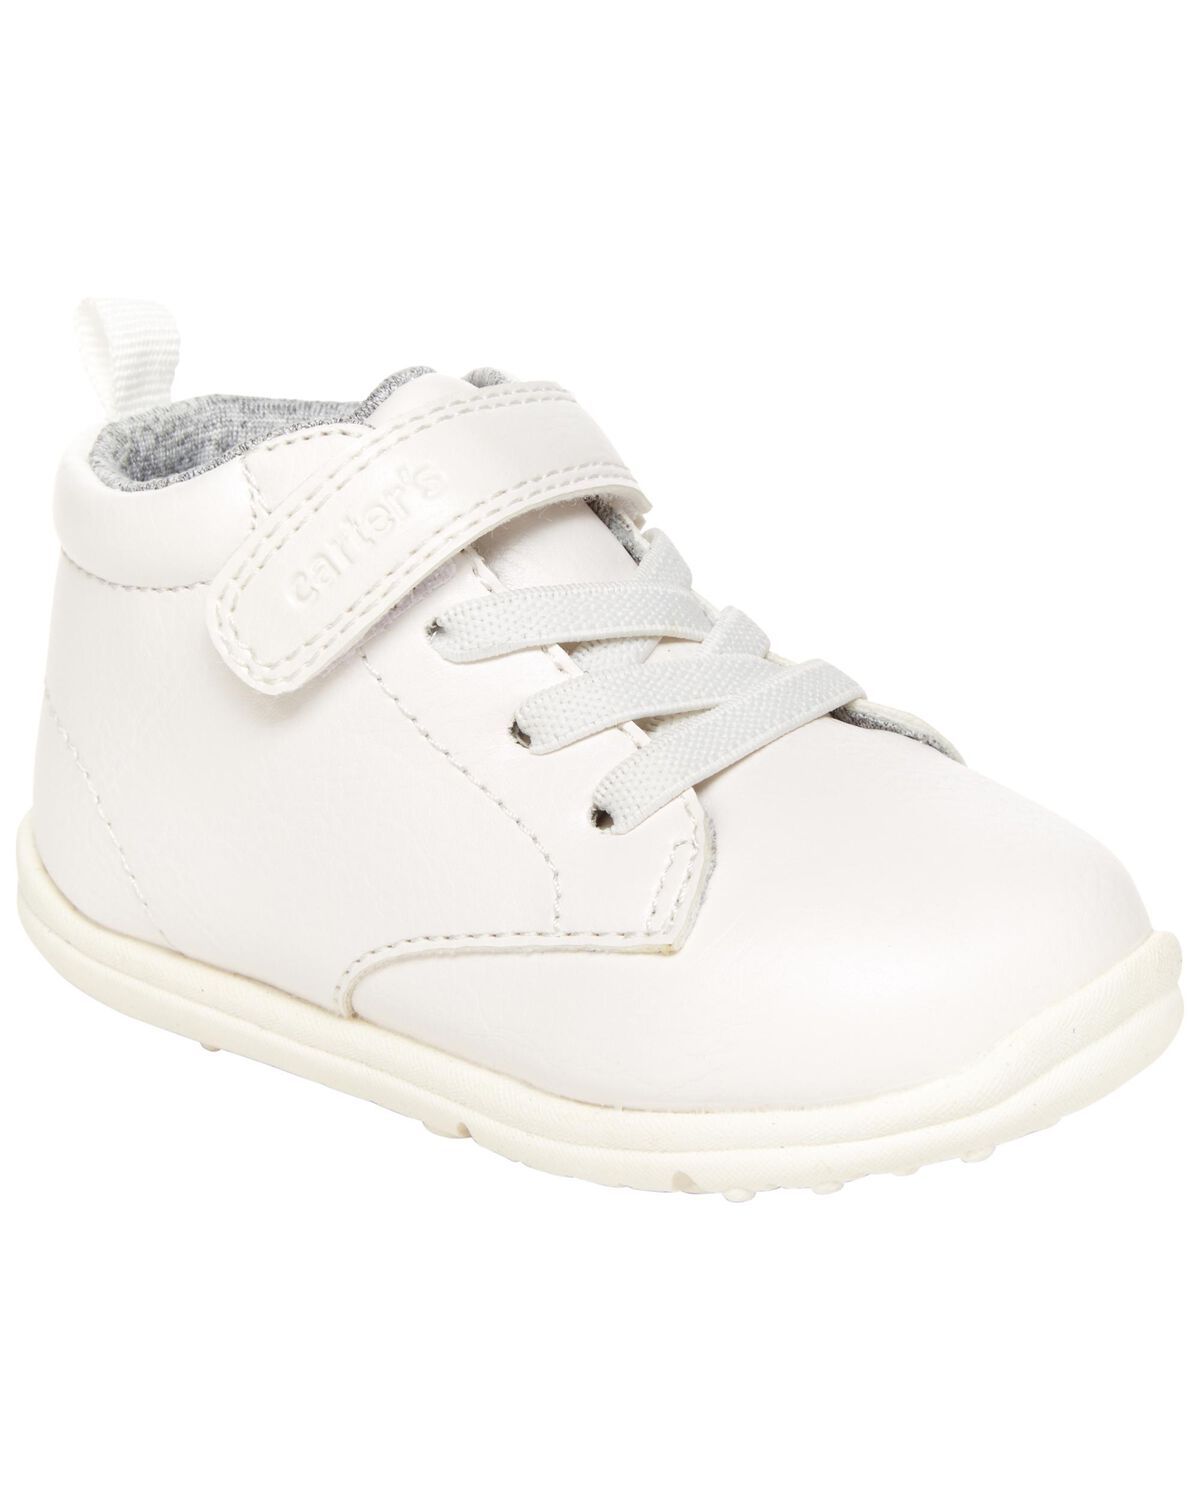 White Baby High-Top Every Step Sneakers | carters.com | Carter's